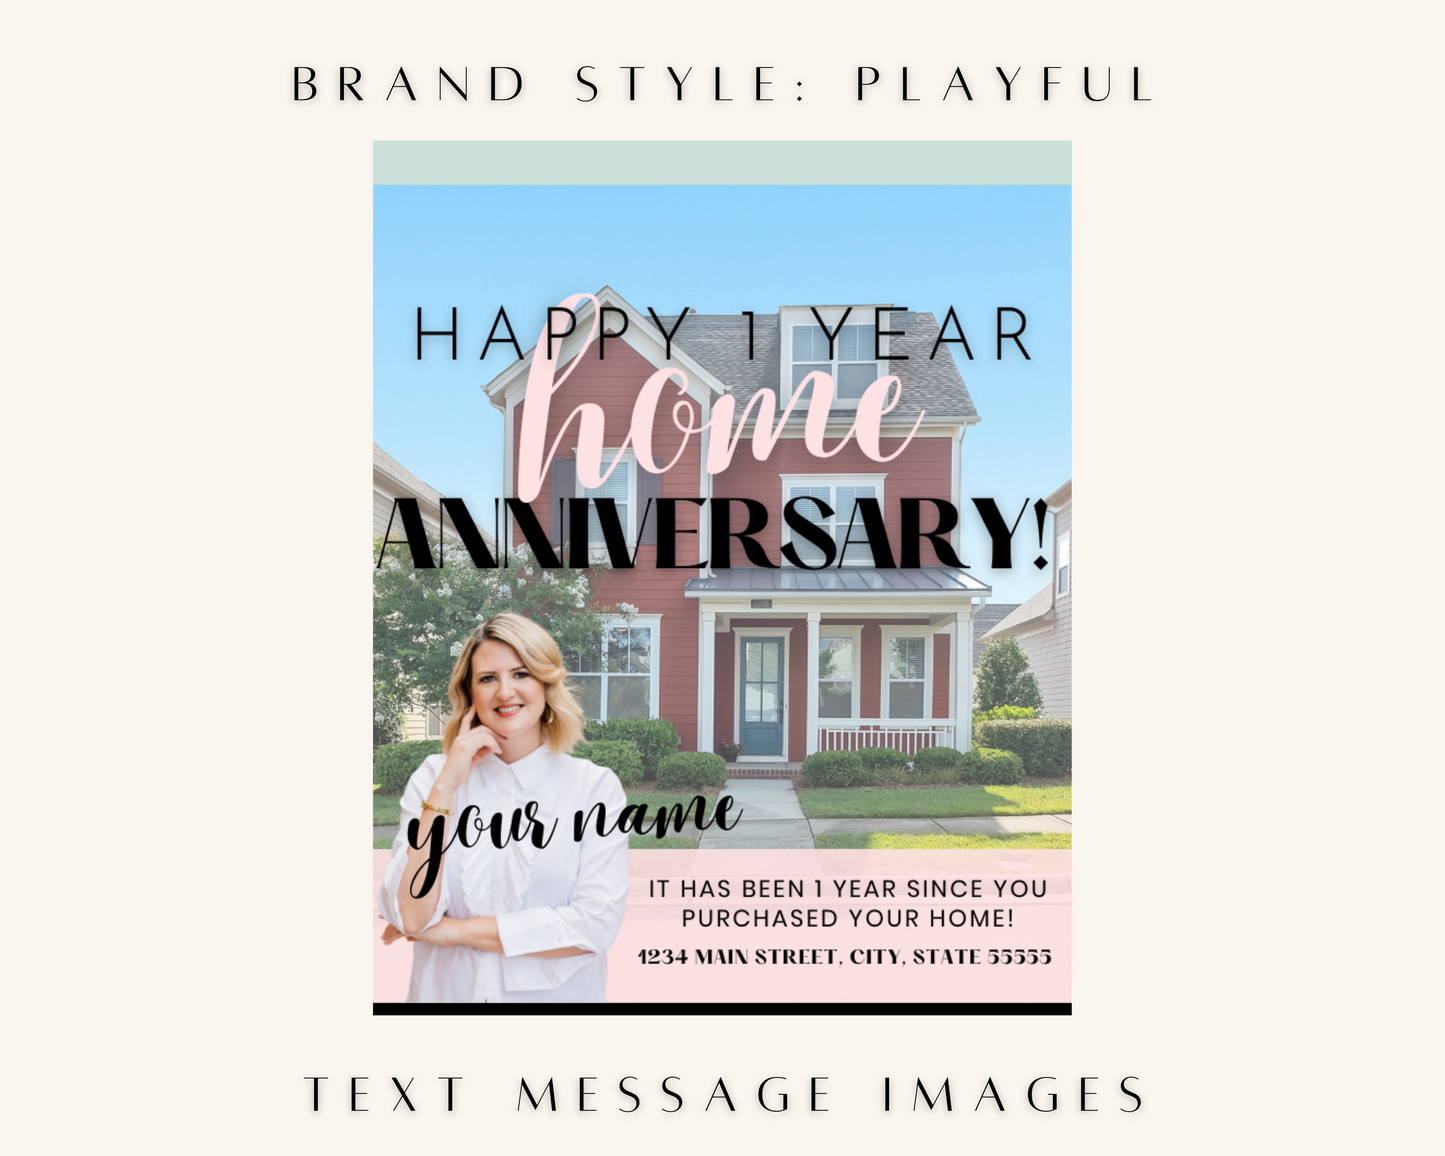 Home Anniversary Text Message - Playful Brand Style